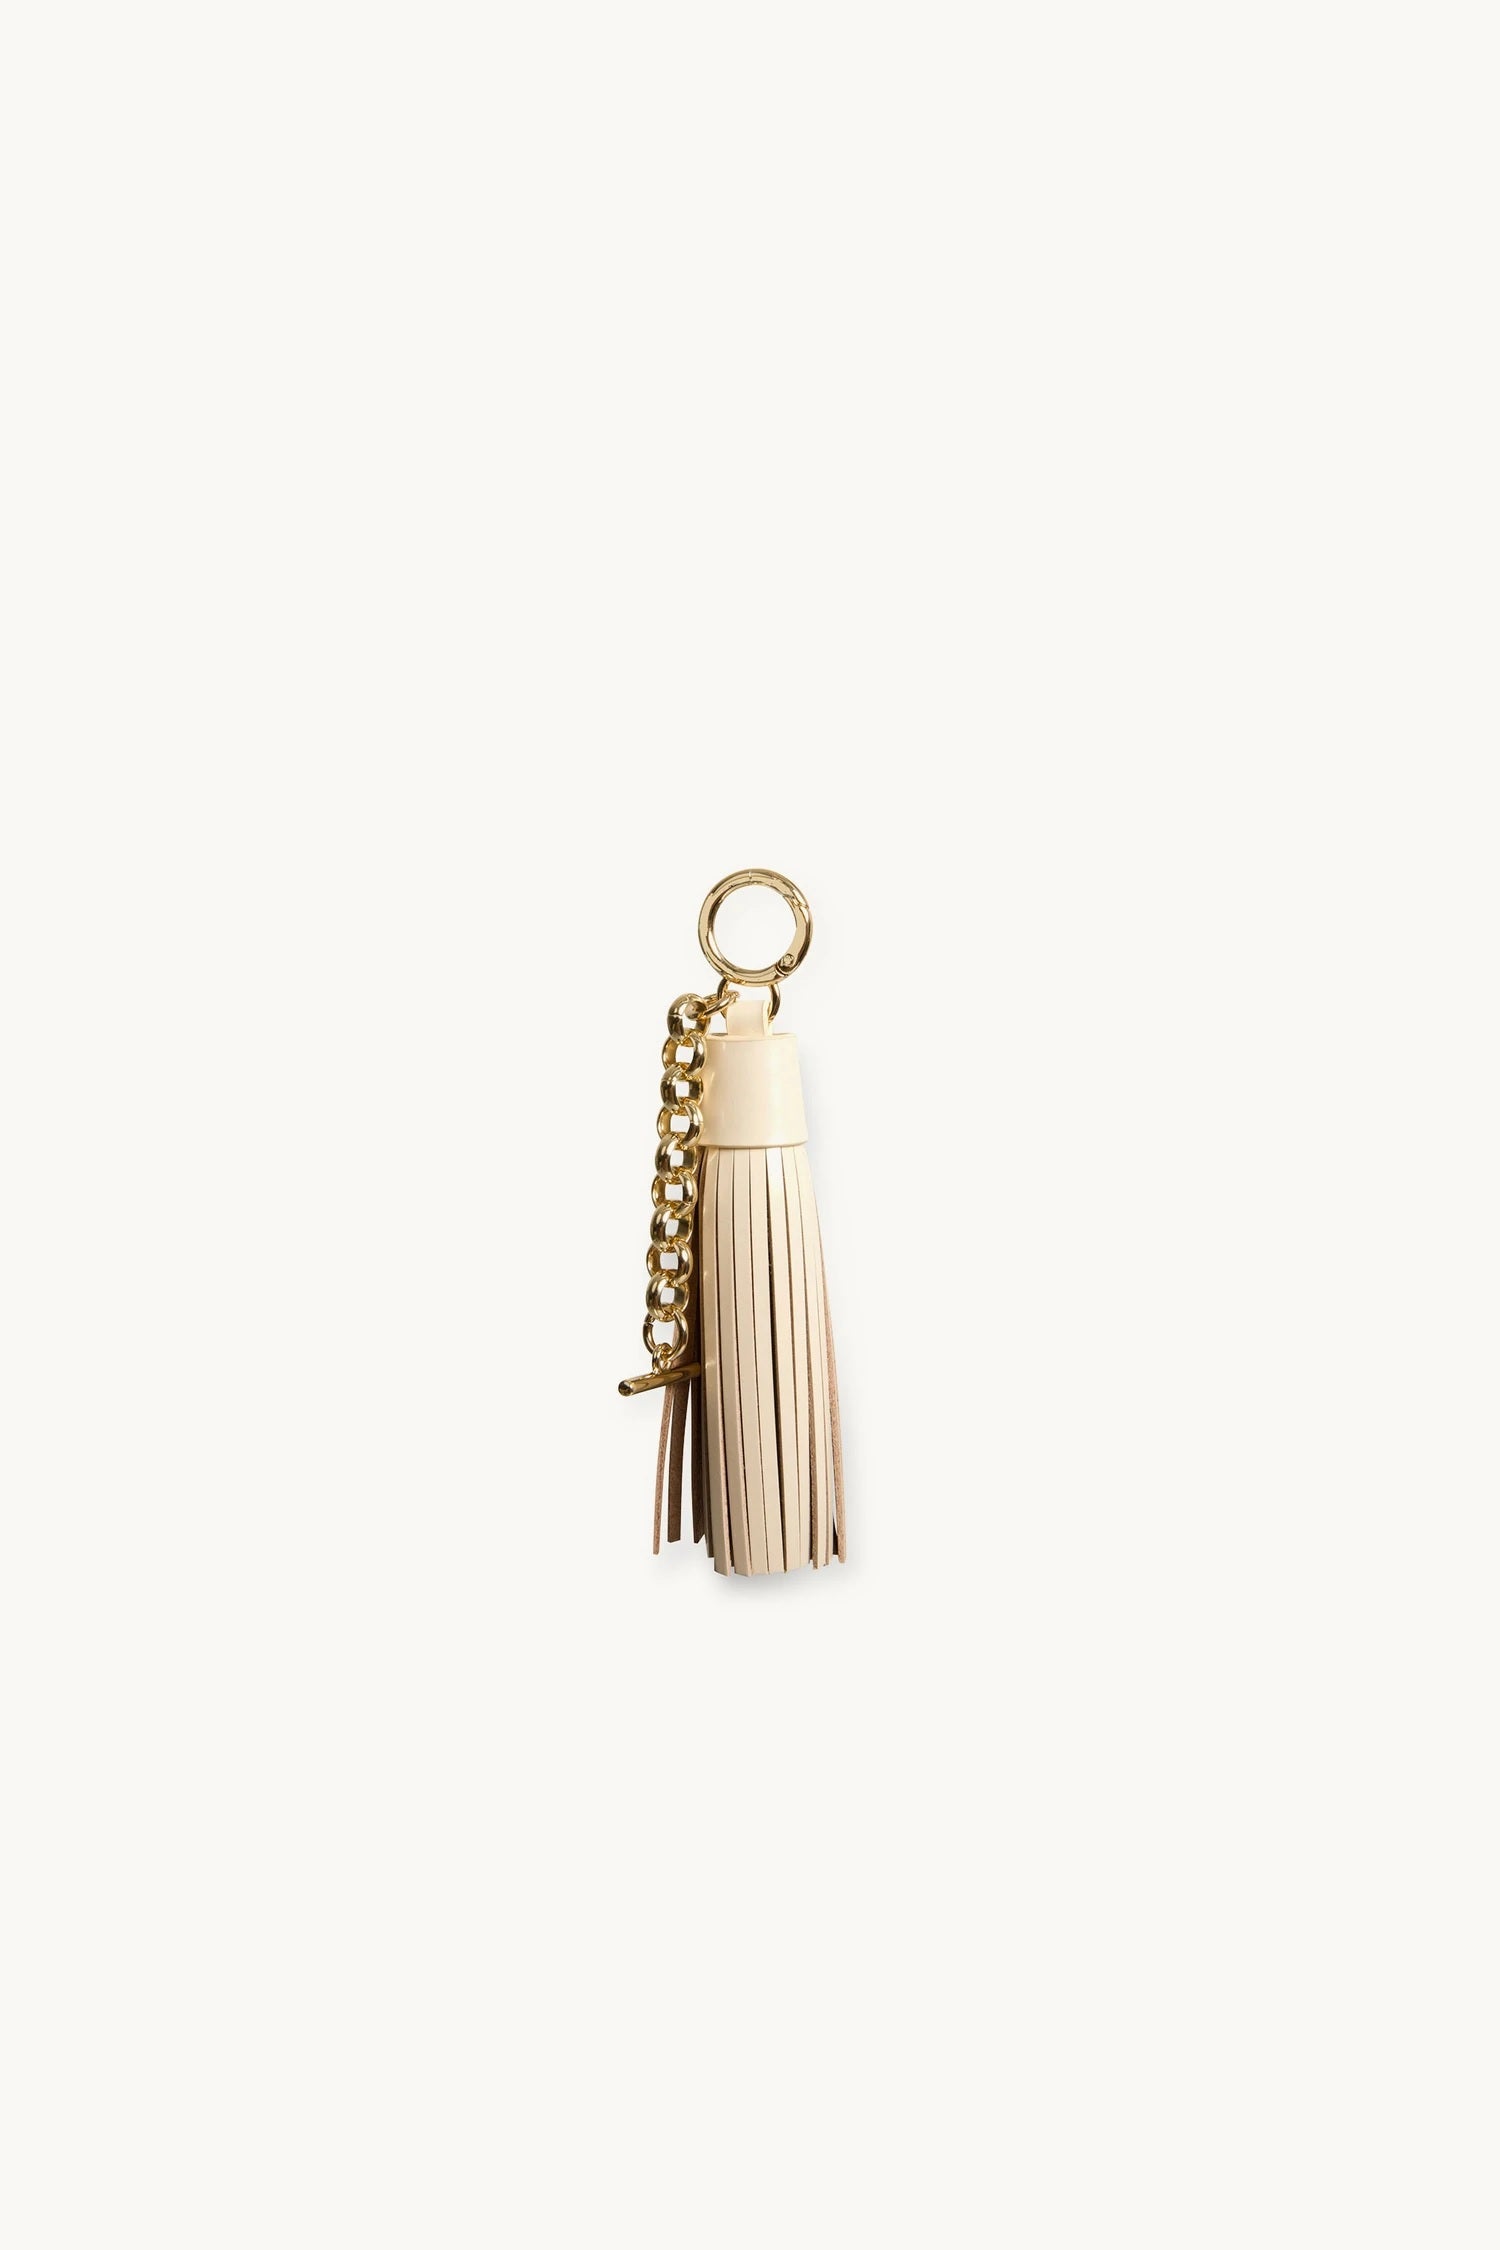 Dylan Kain The Harlow Lux Keychain Cream/Light Gold